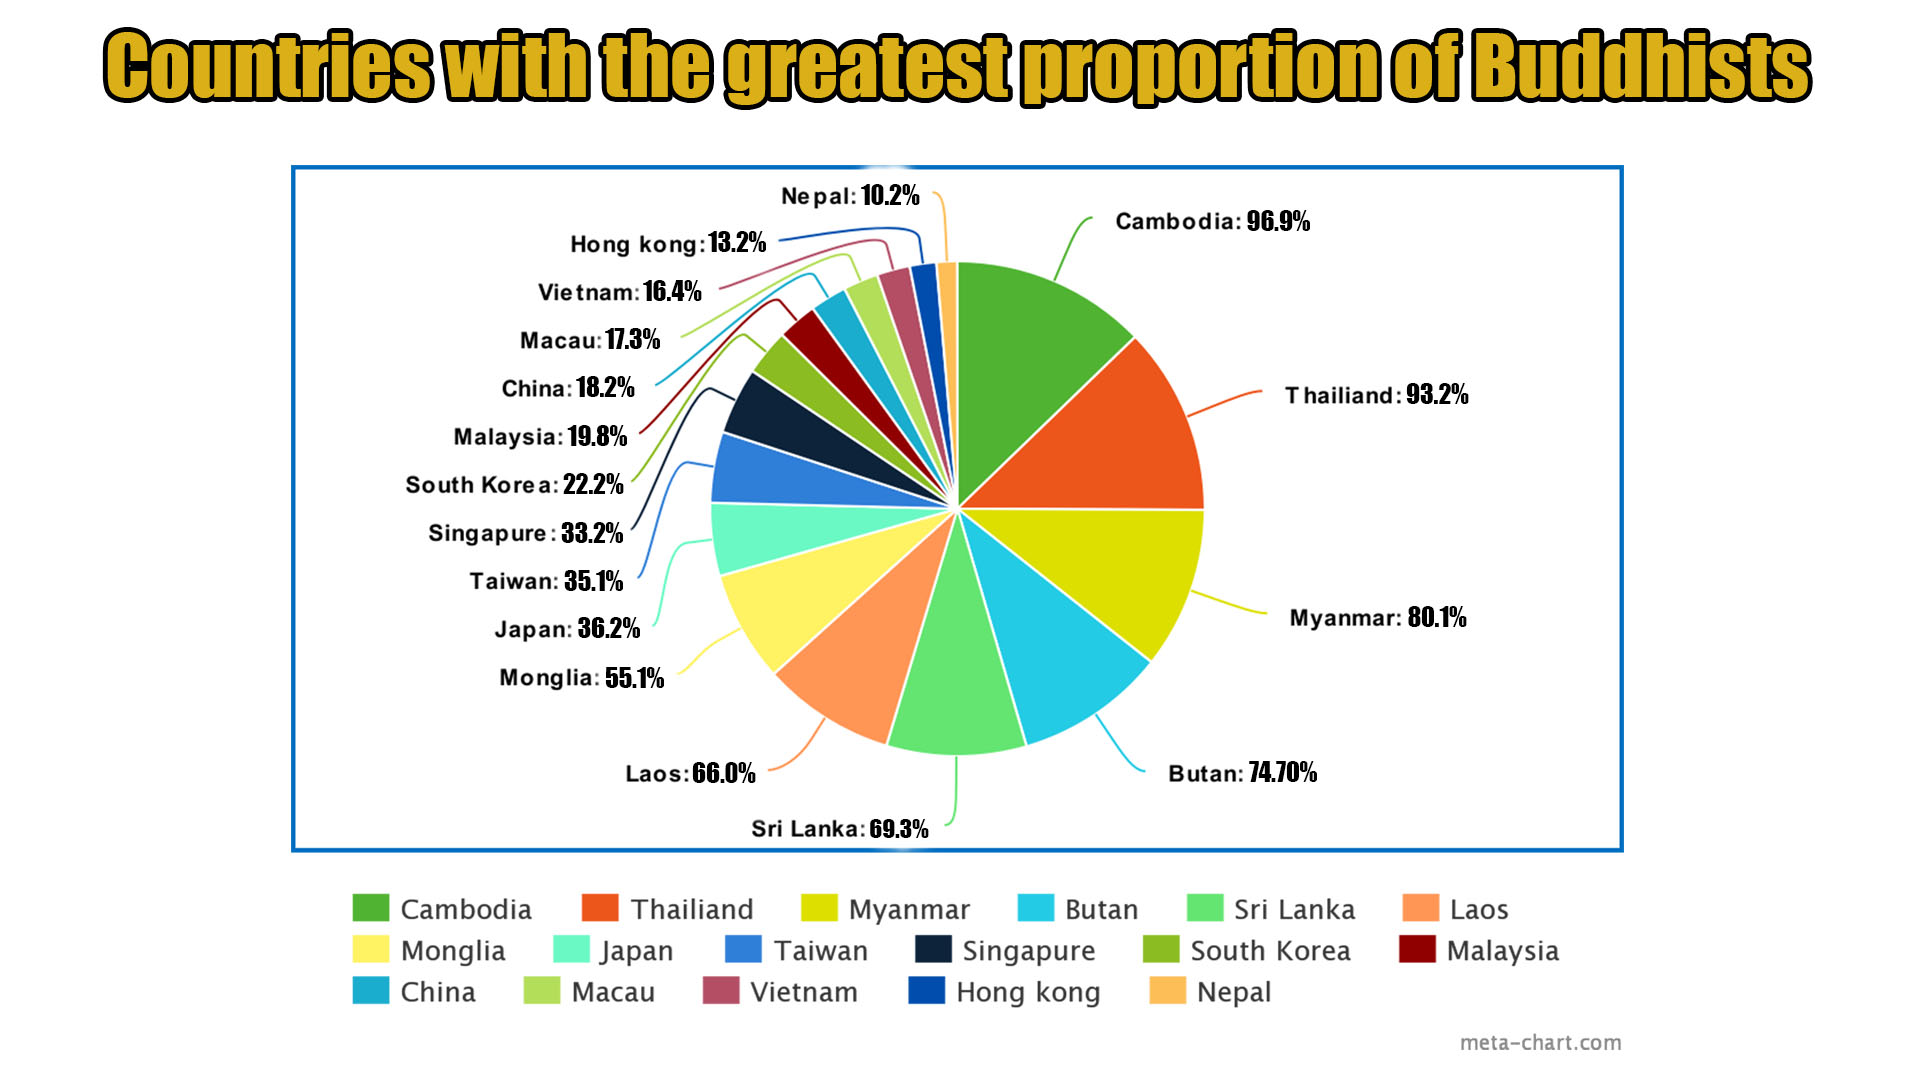 506 million Buddhists around globe making 6% of the total population in World context